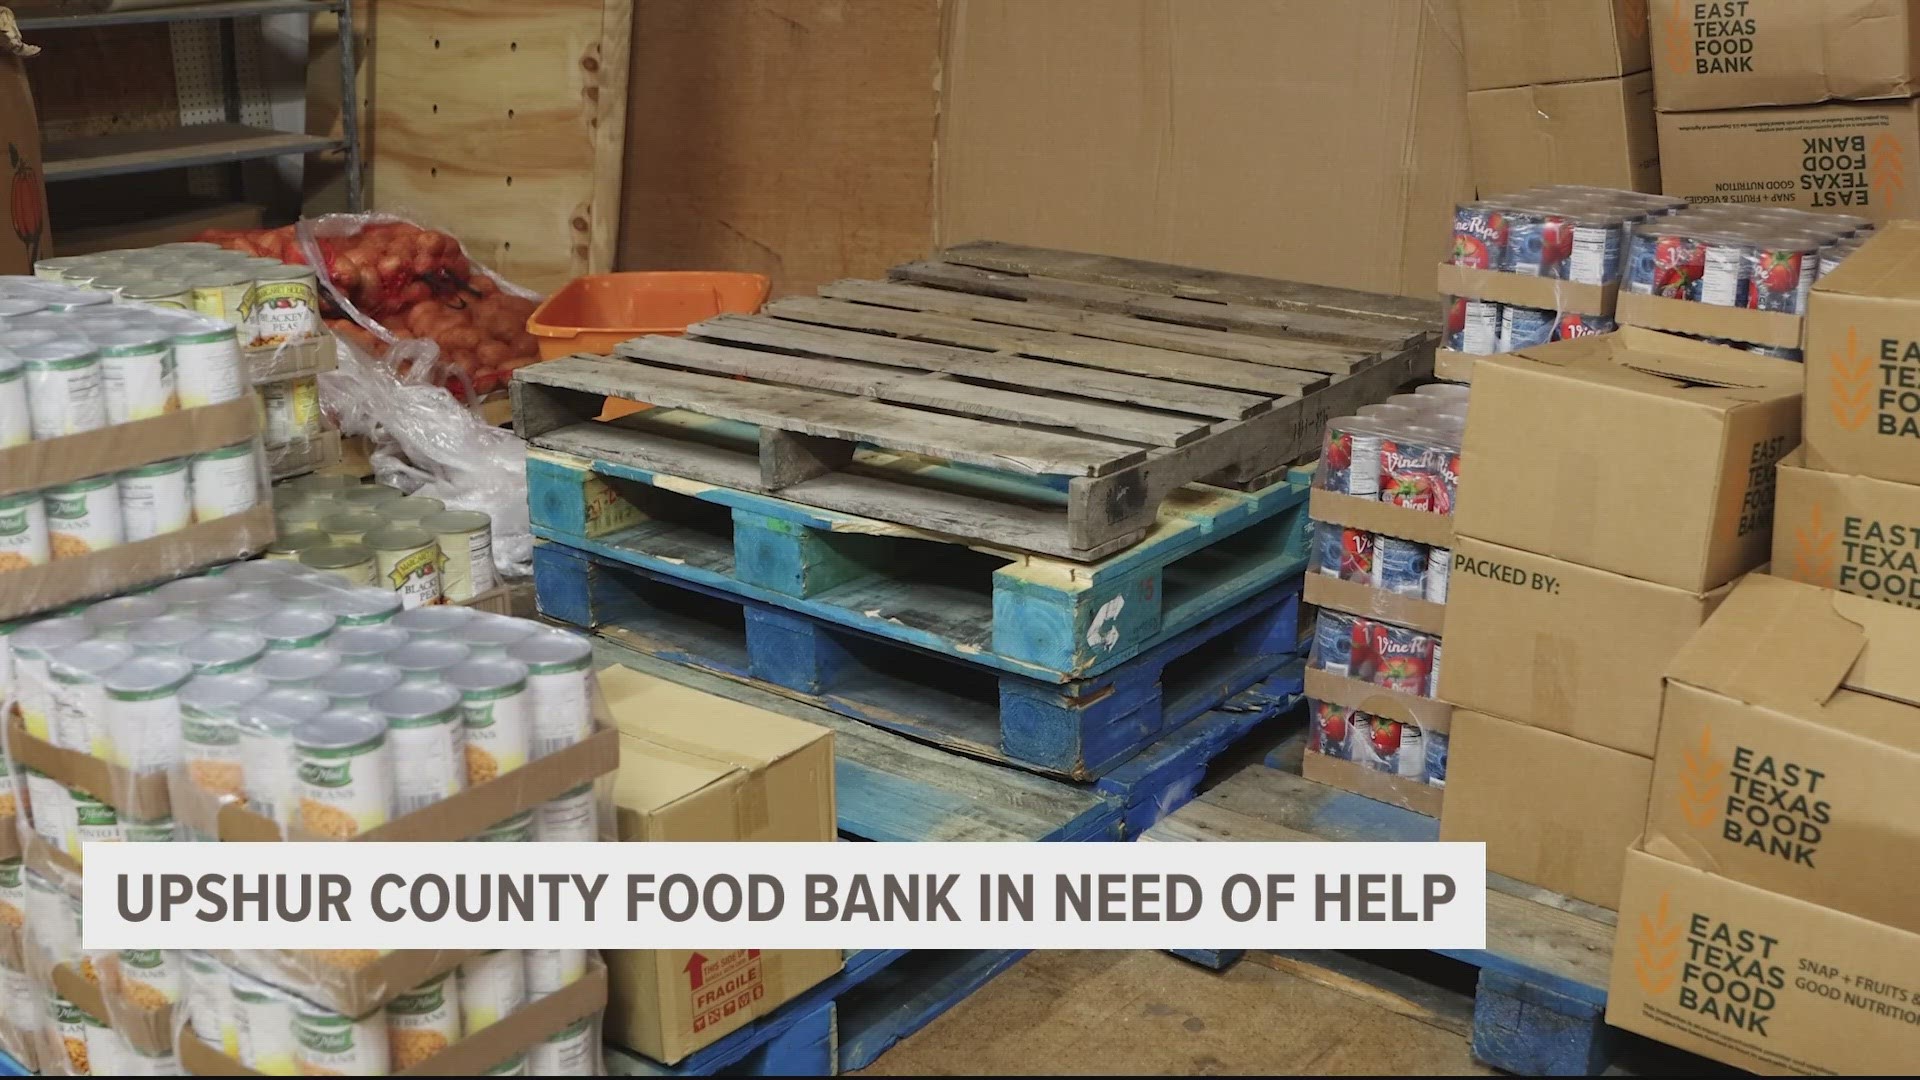 Upshur County Food Bank in Gilmer asks for donations, volunteers amid increase in demand